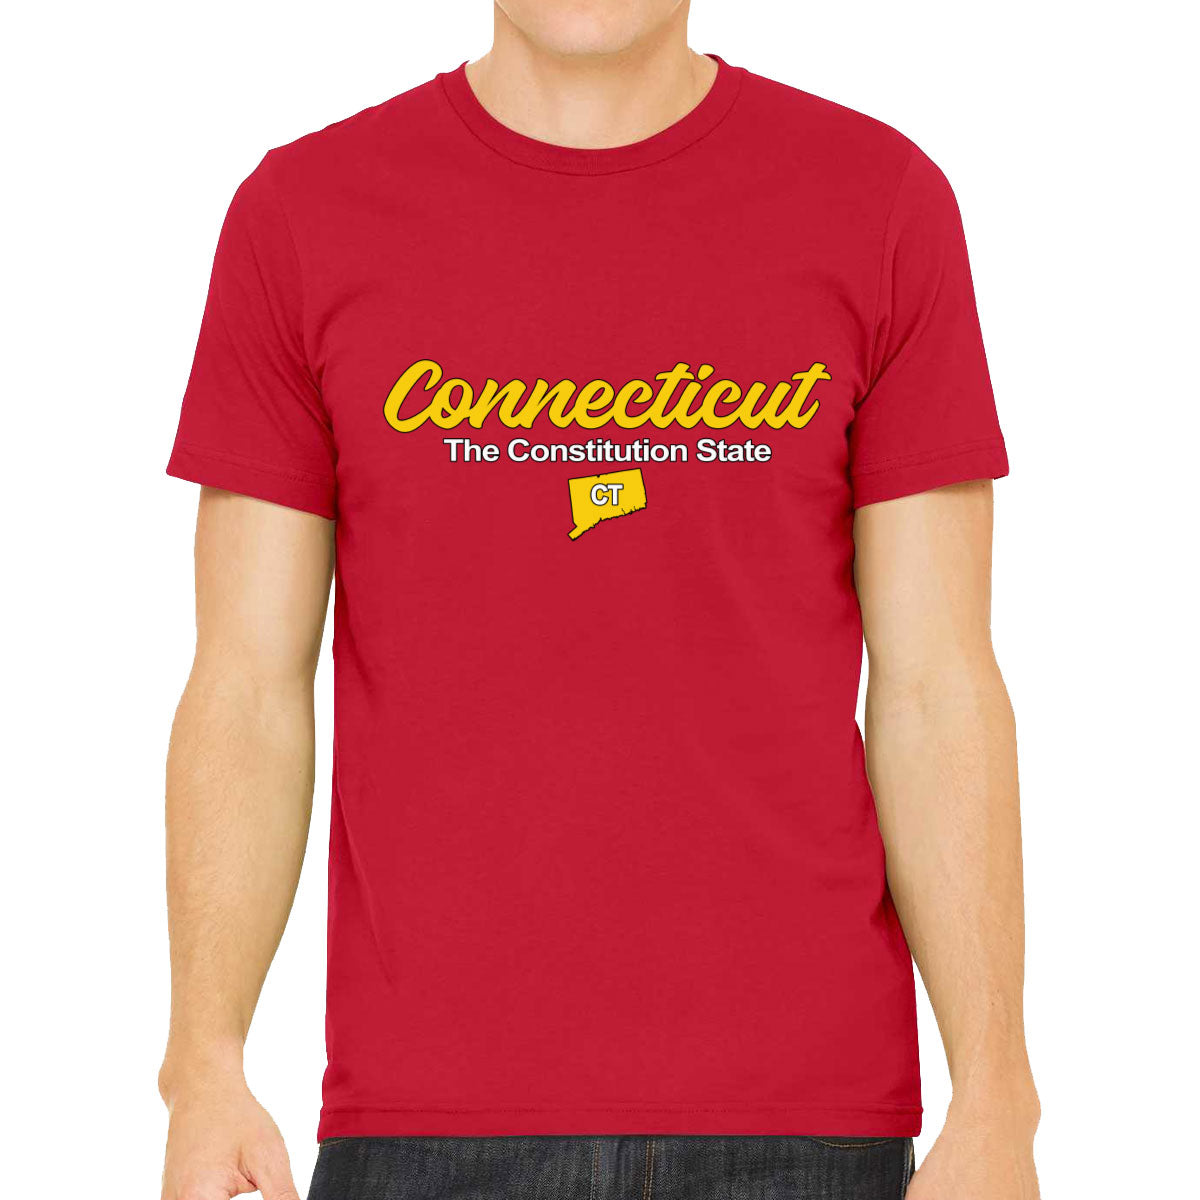 Connecticut The Constitution State Men's T-shirt